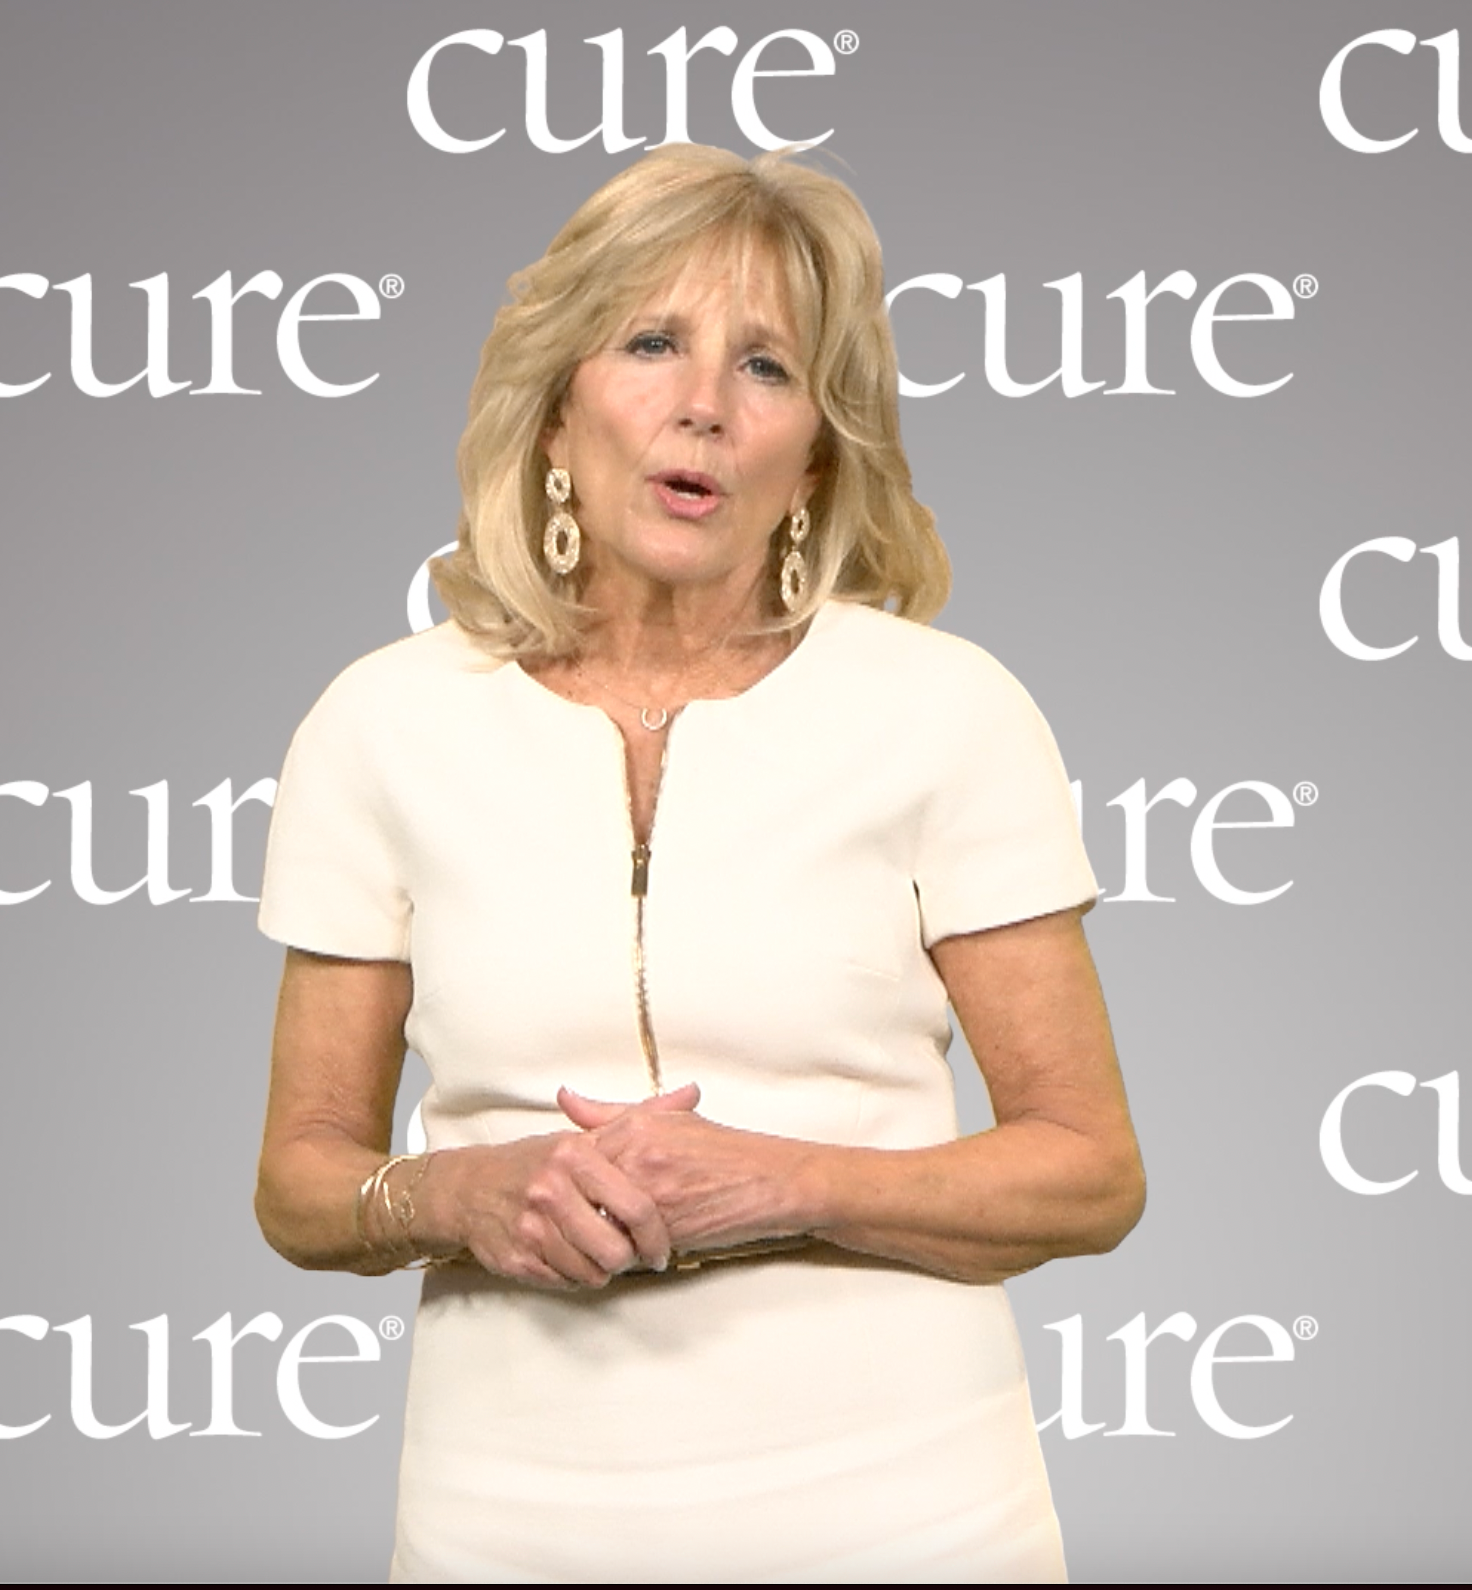 First Lady Jill Biden, in a white dress, speaking in front of a gray background that says "CURE"